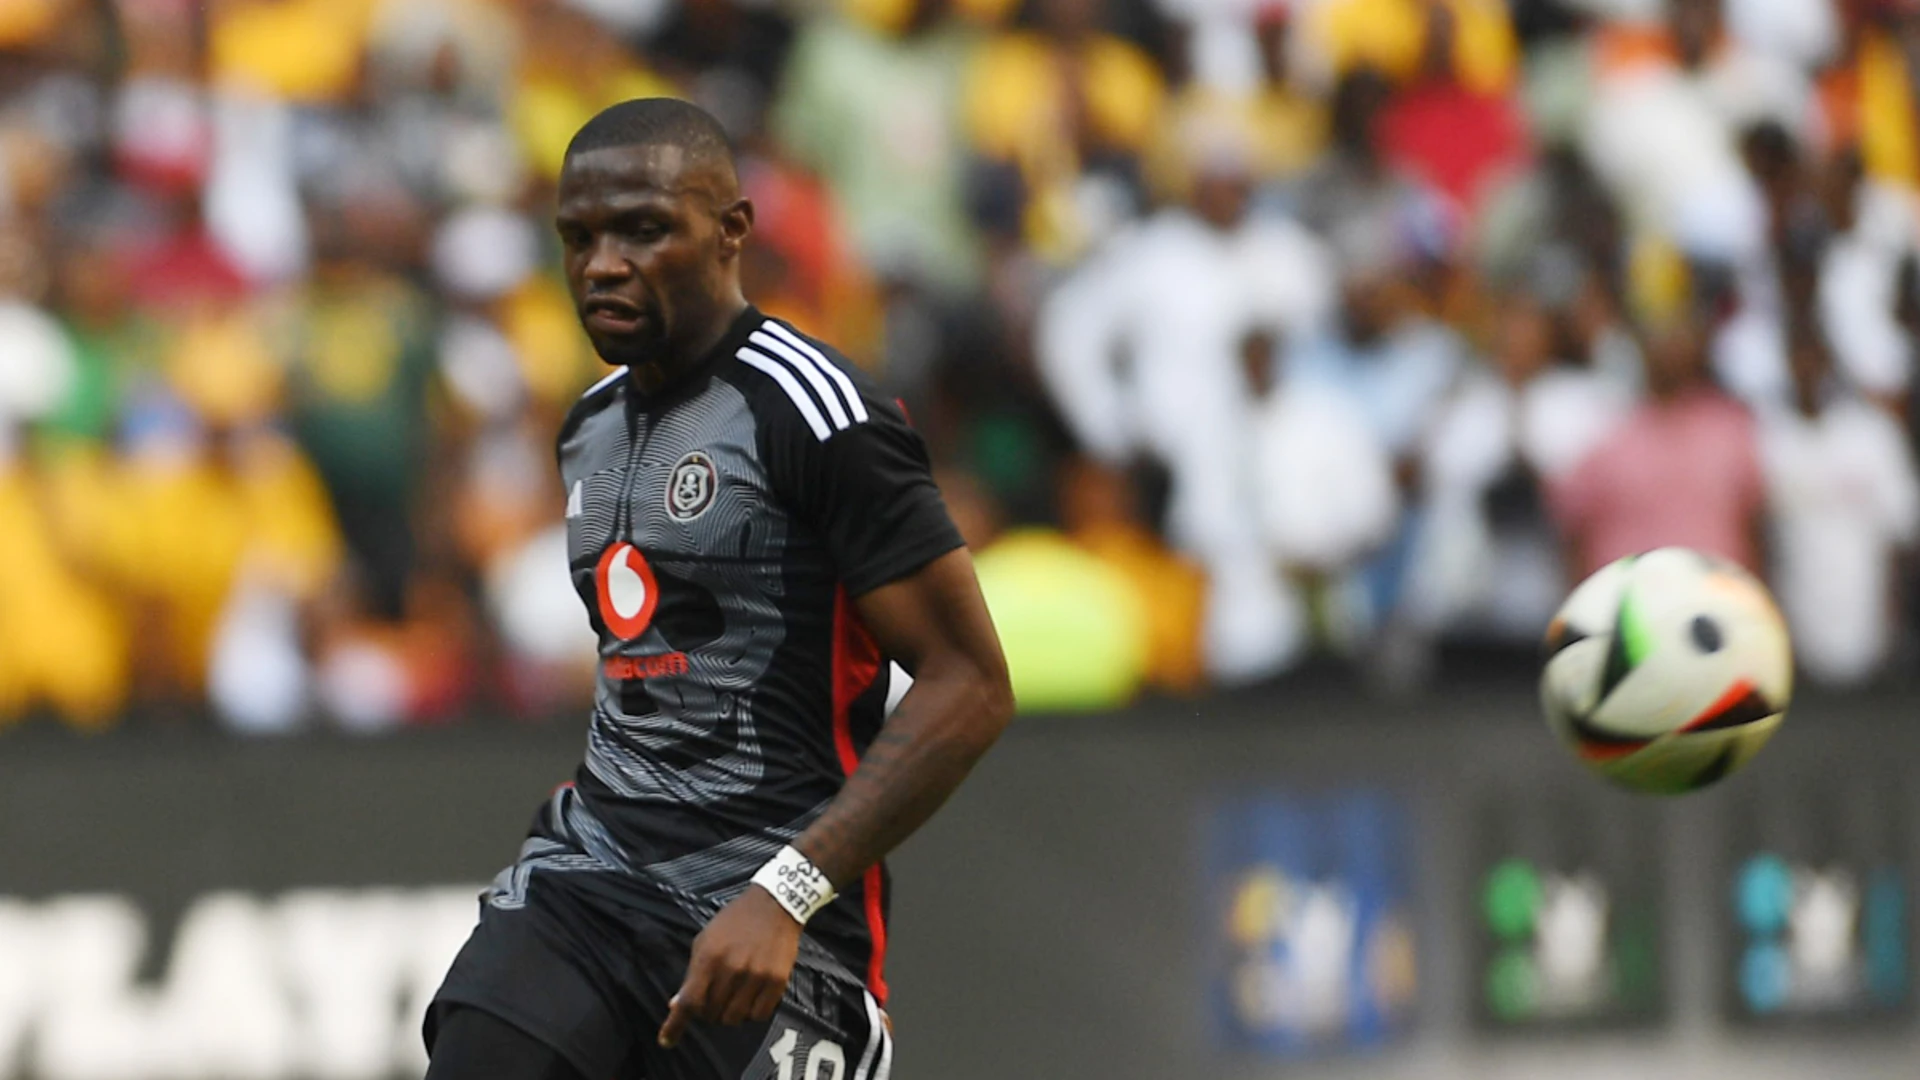 Bucs out to boost CAFCL hopes with Richards Bay win